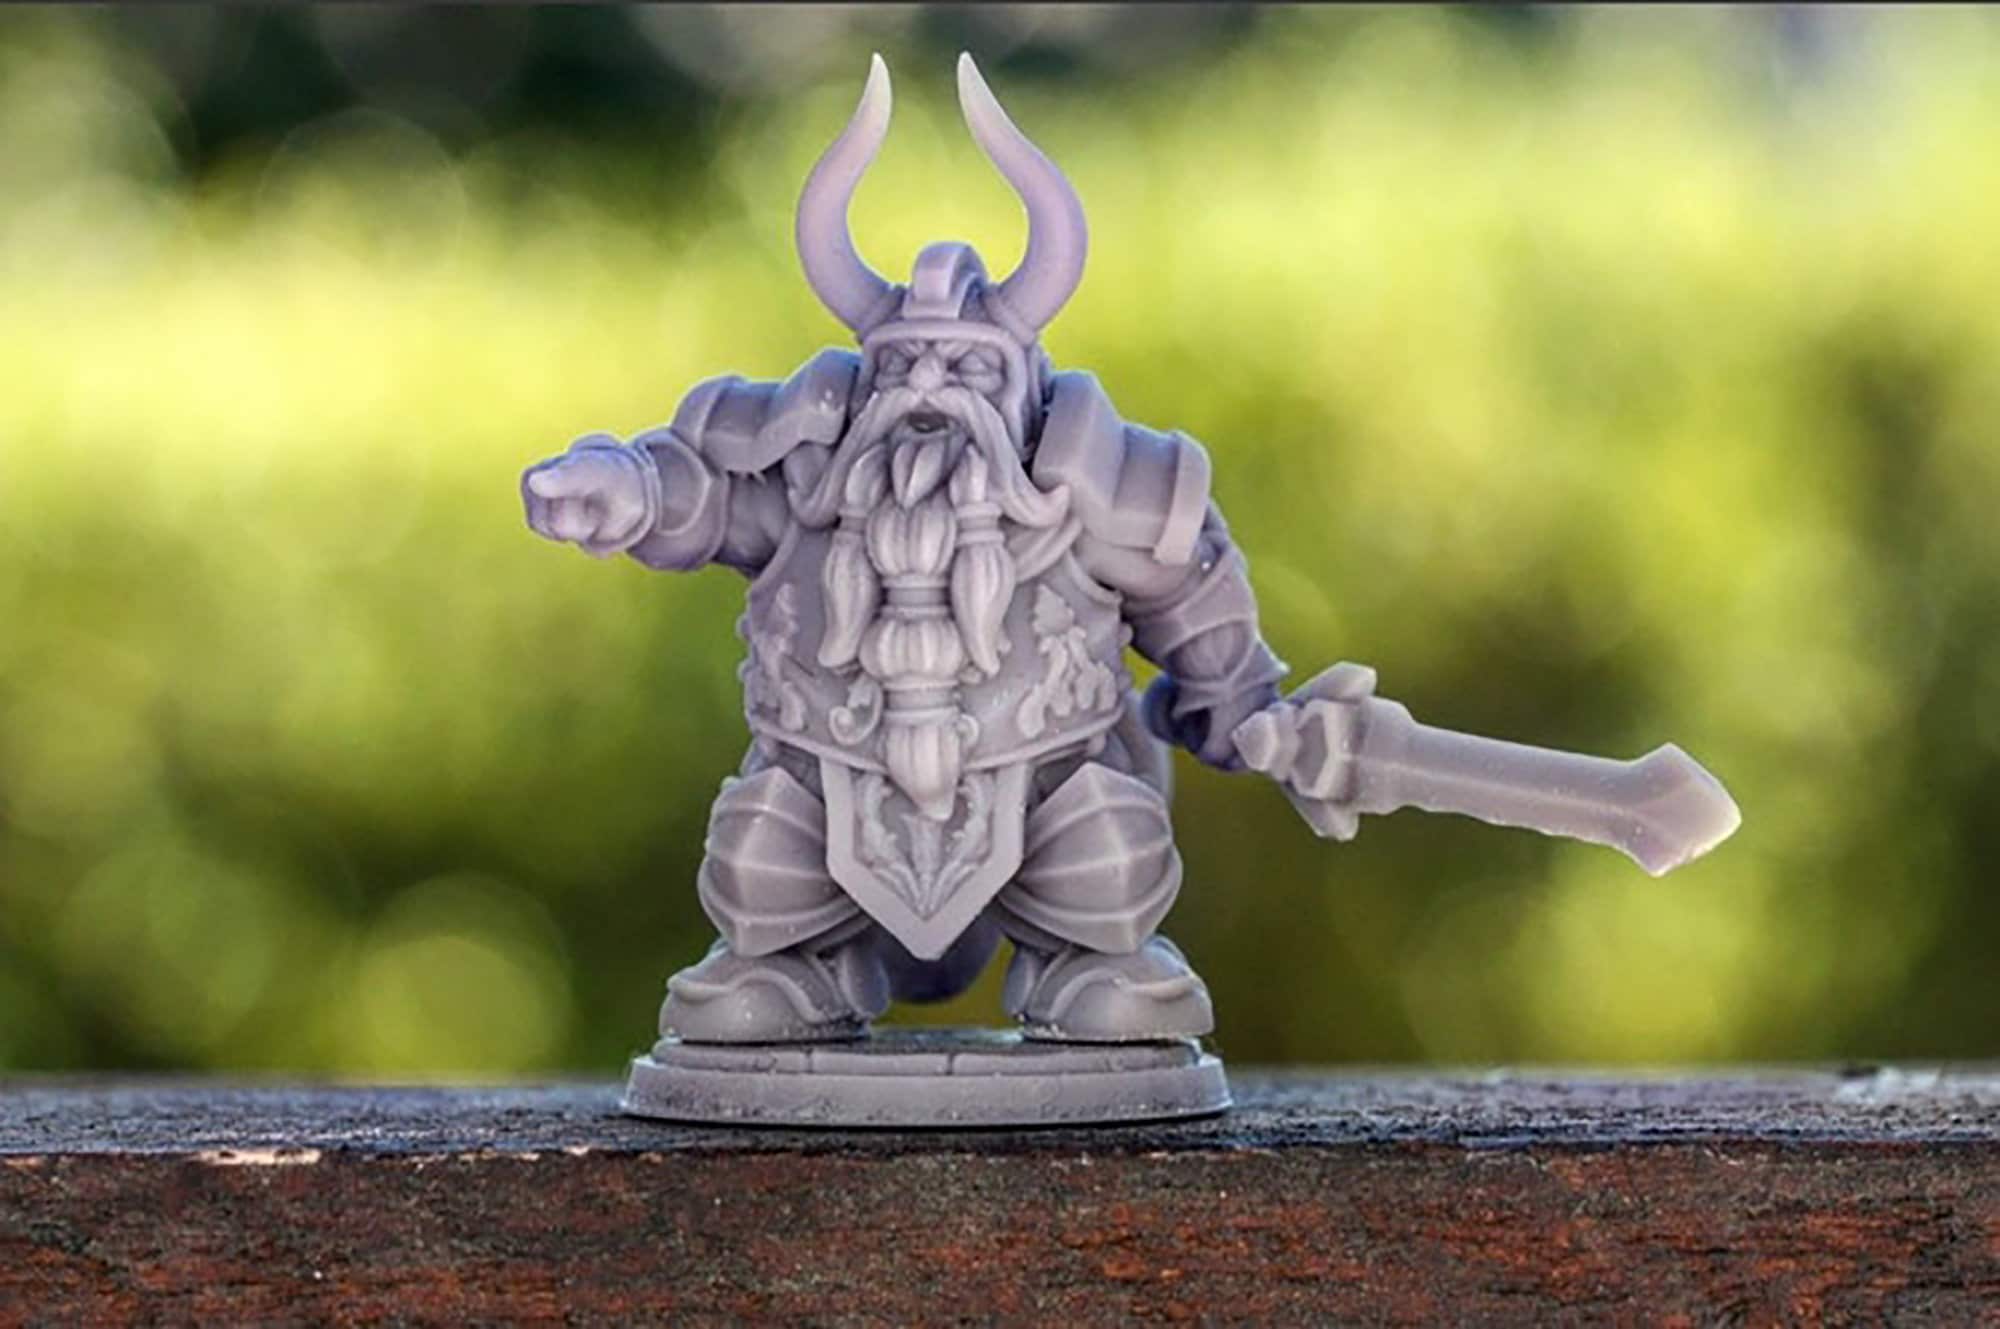 DWARF FIGHTER (M) "Luther the King" | Dungeons and Dragons | DnD | Pathfinder | Tabletop | RPG | Hero Size | 28 mm-Role Playing Miniatures